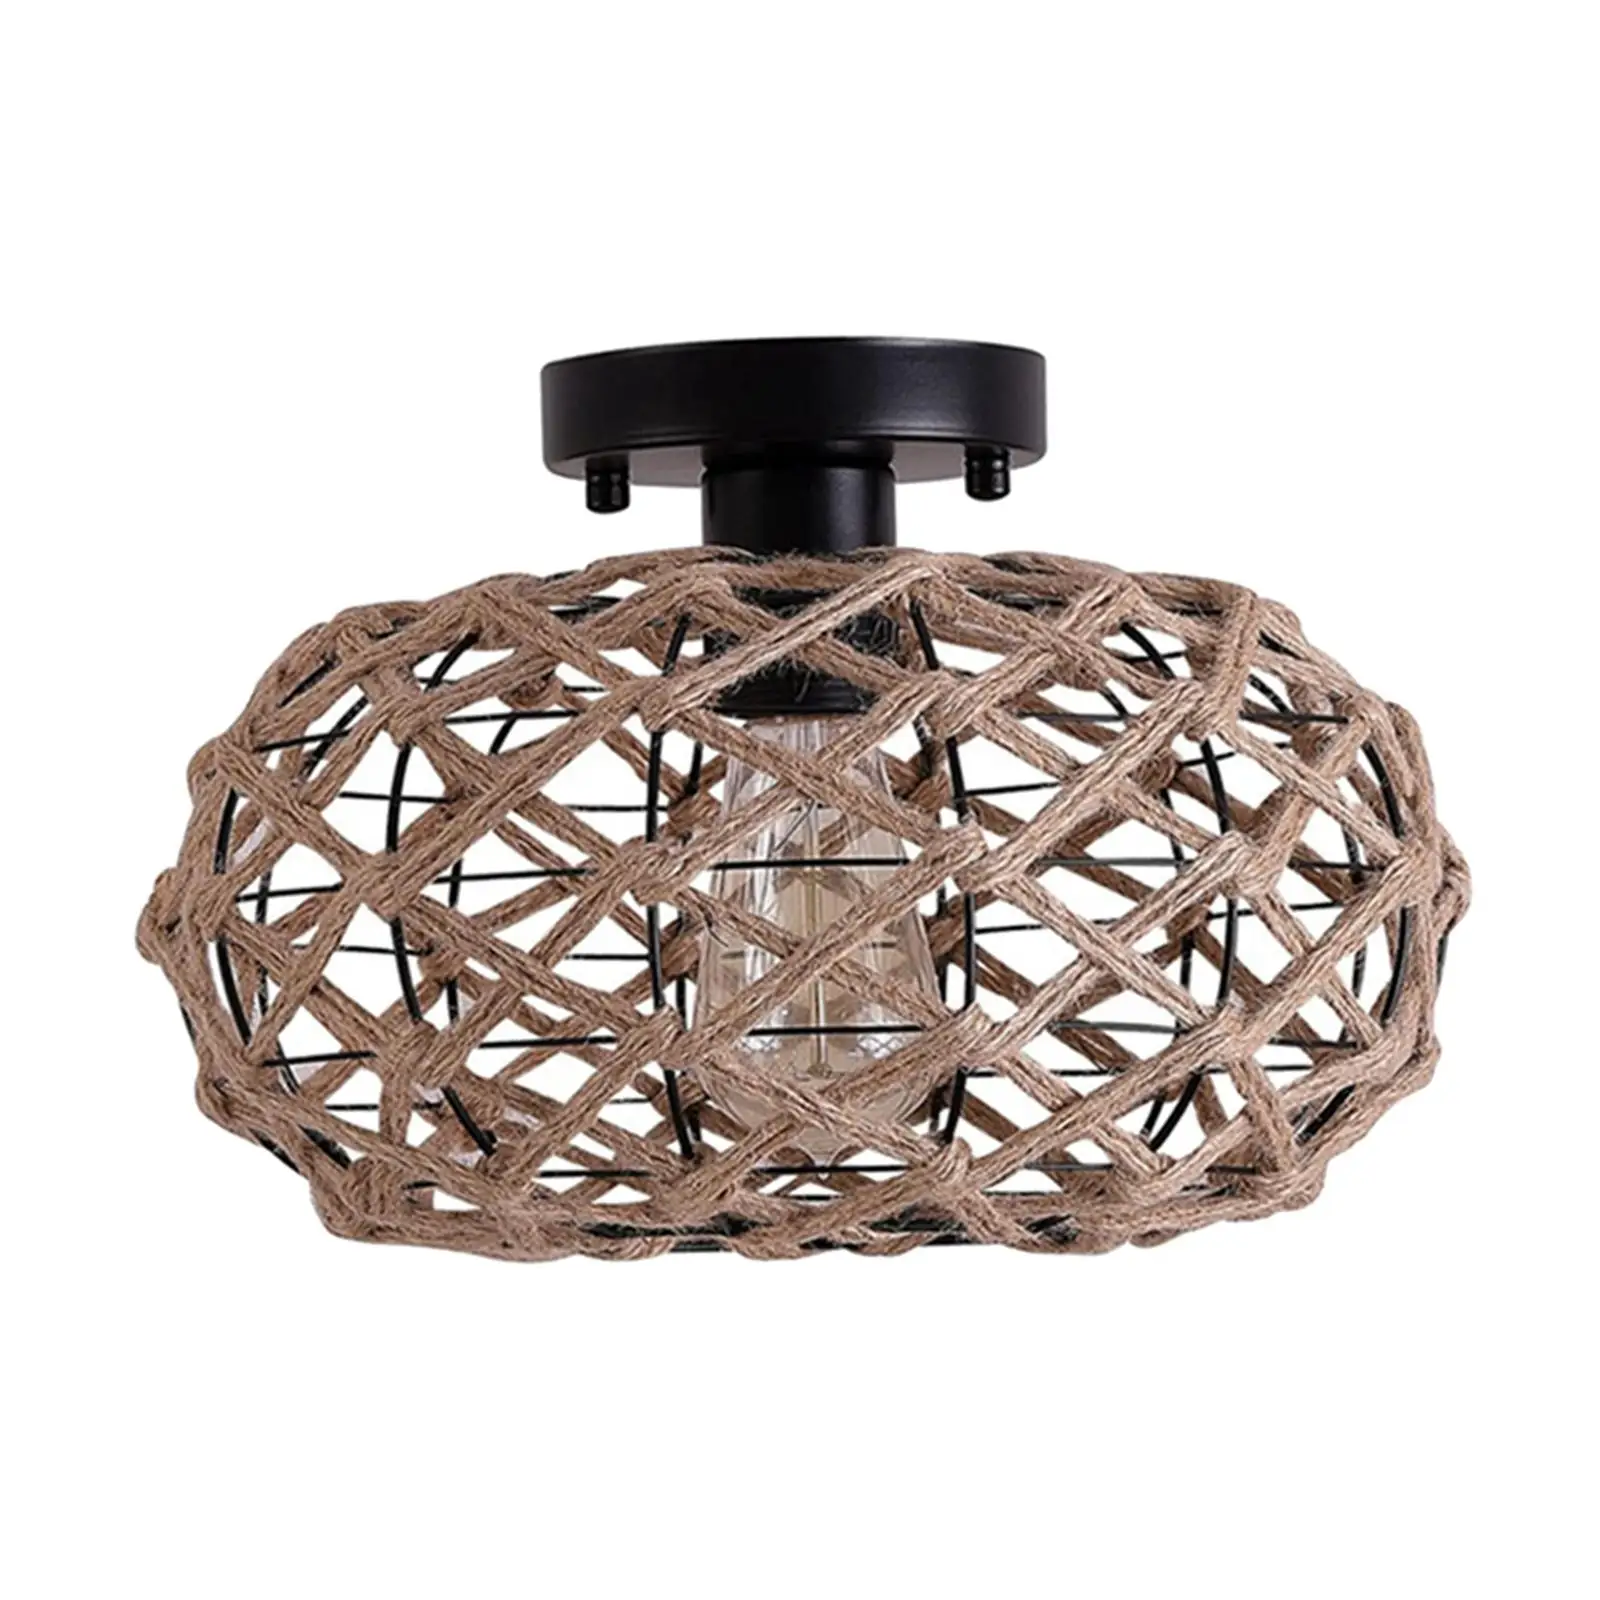 Classic Woven Lamp Shade Pendant Light Cover Ornament Lampshade for Dining Room Office Kitchen Island